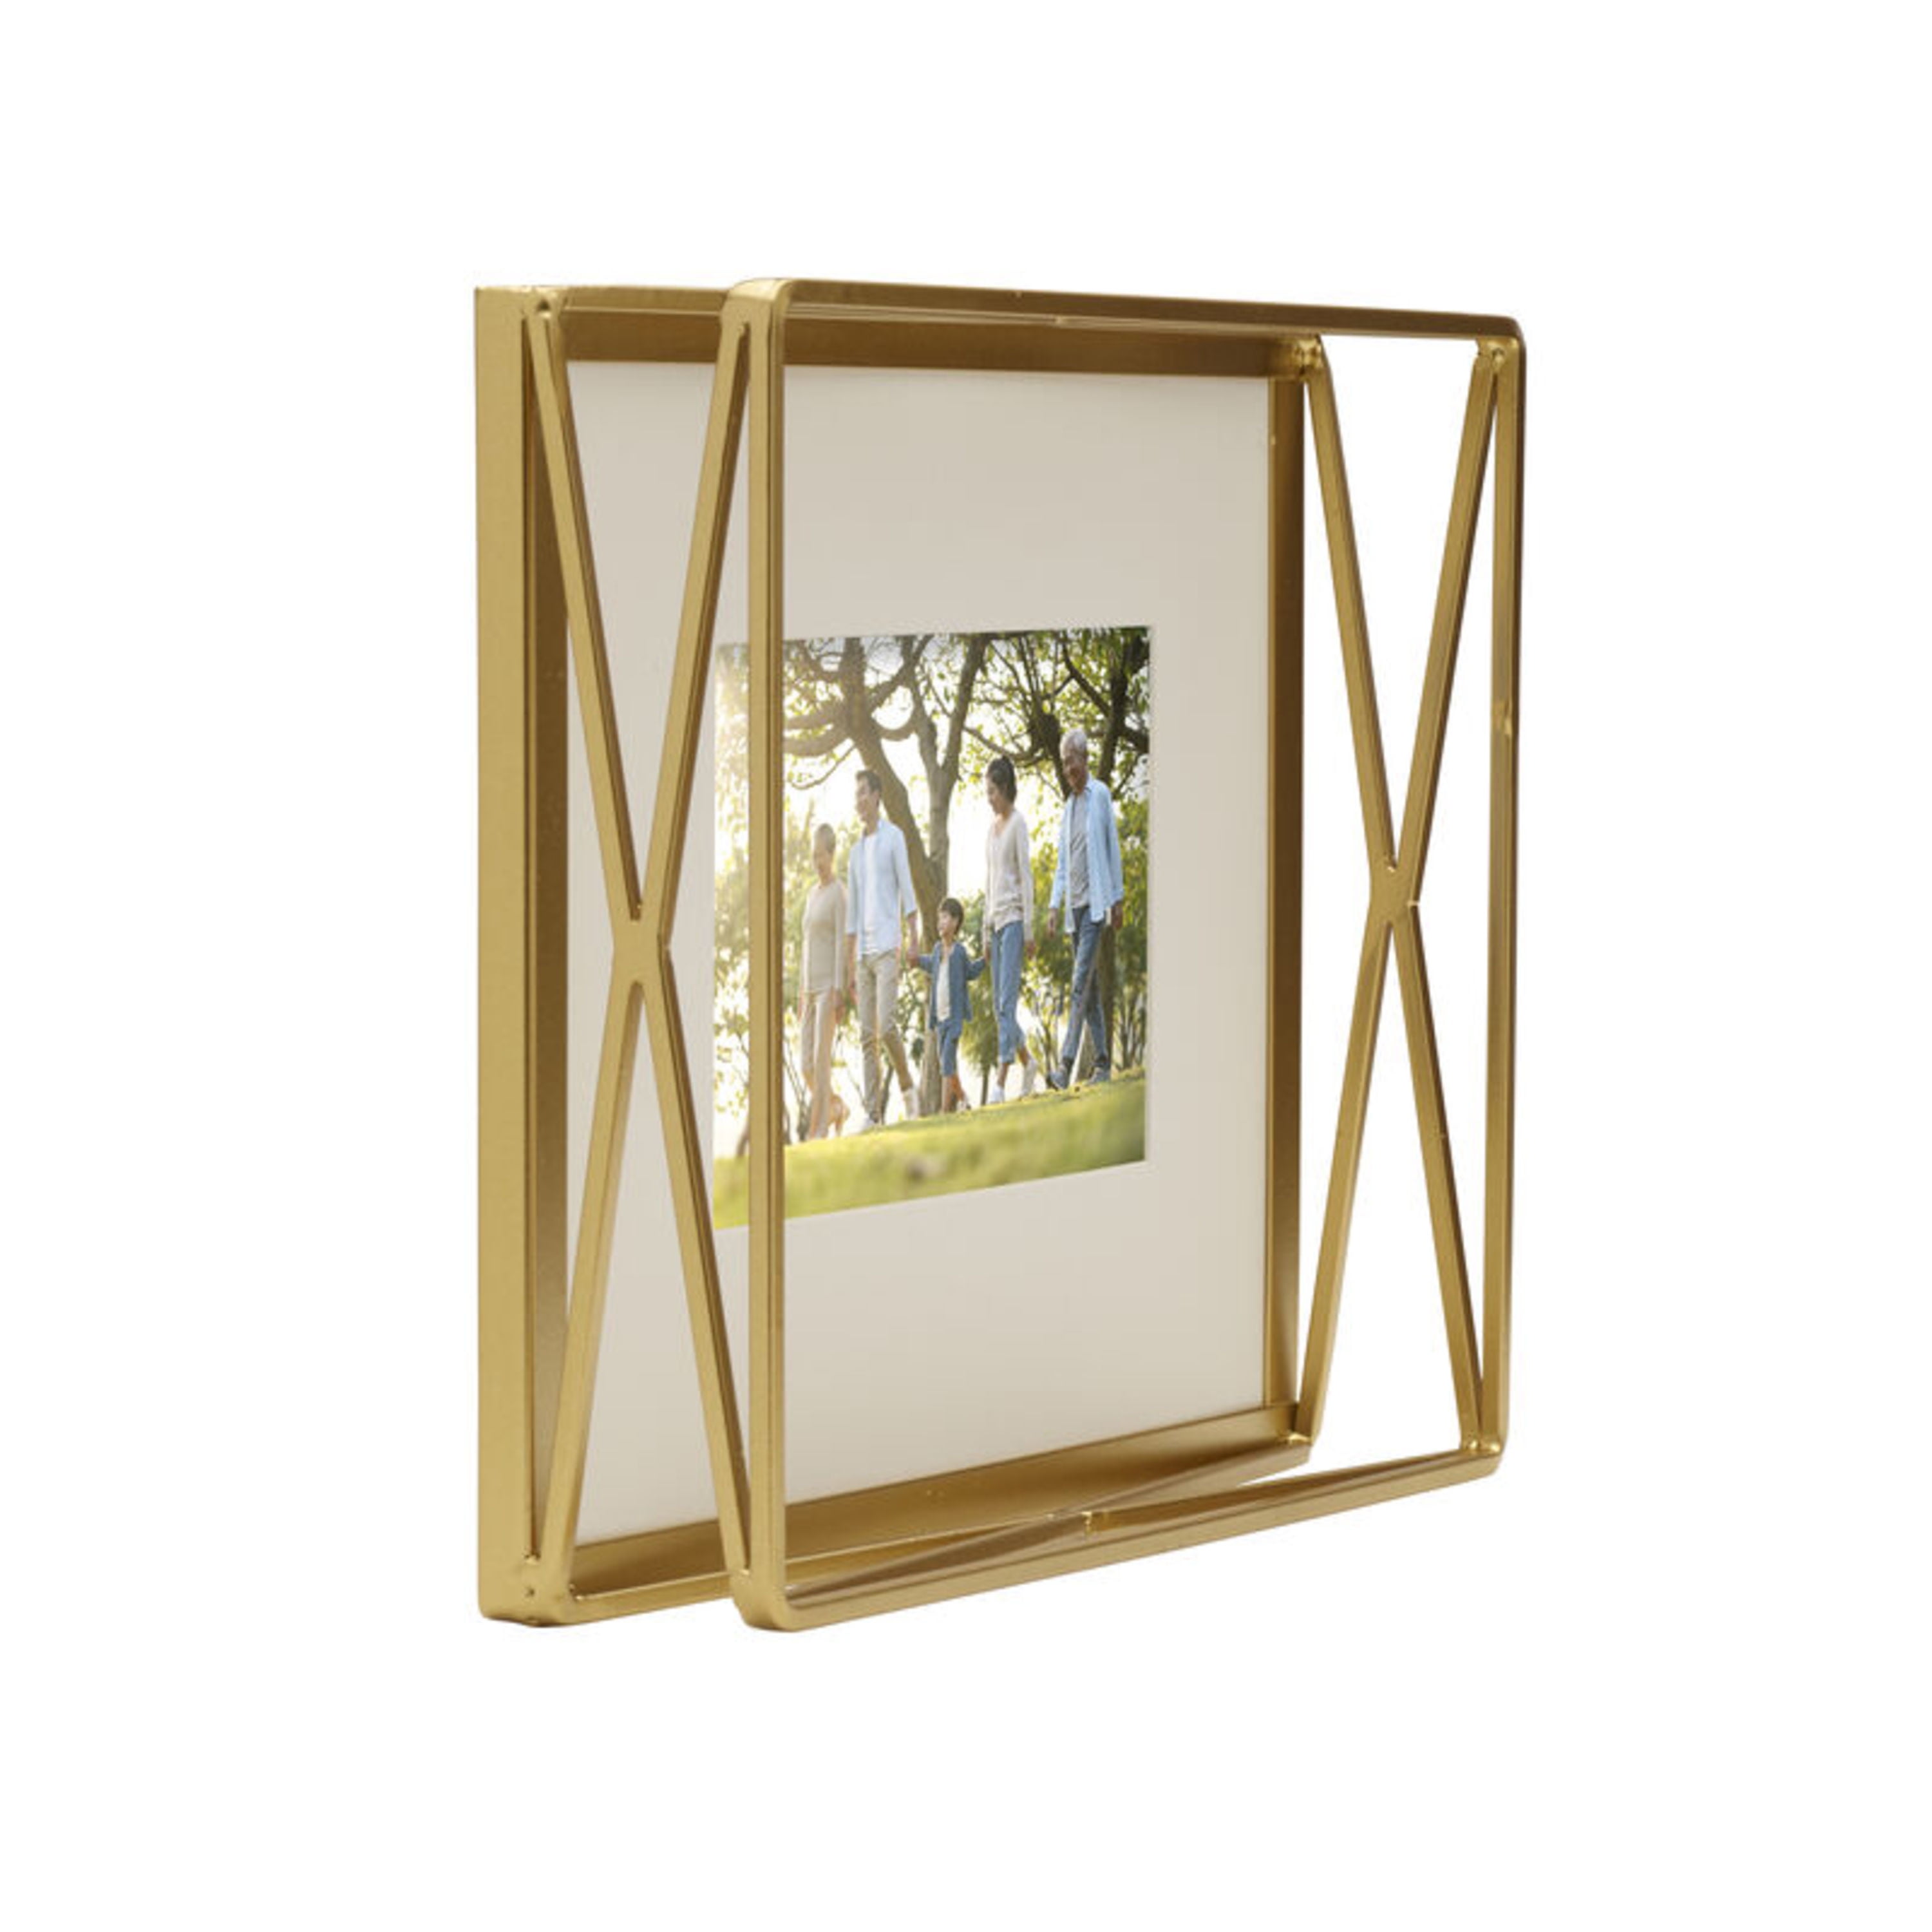 Gold Metal Picture Frame for 4 x 6 Inch Photos 6 x 7.75 Inches 